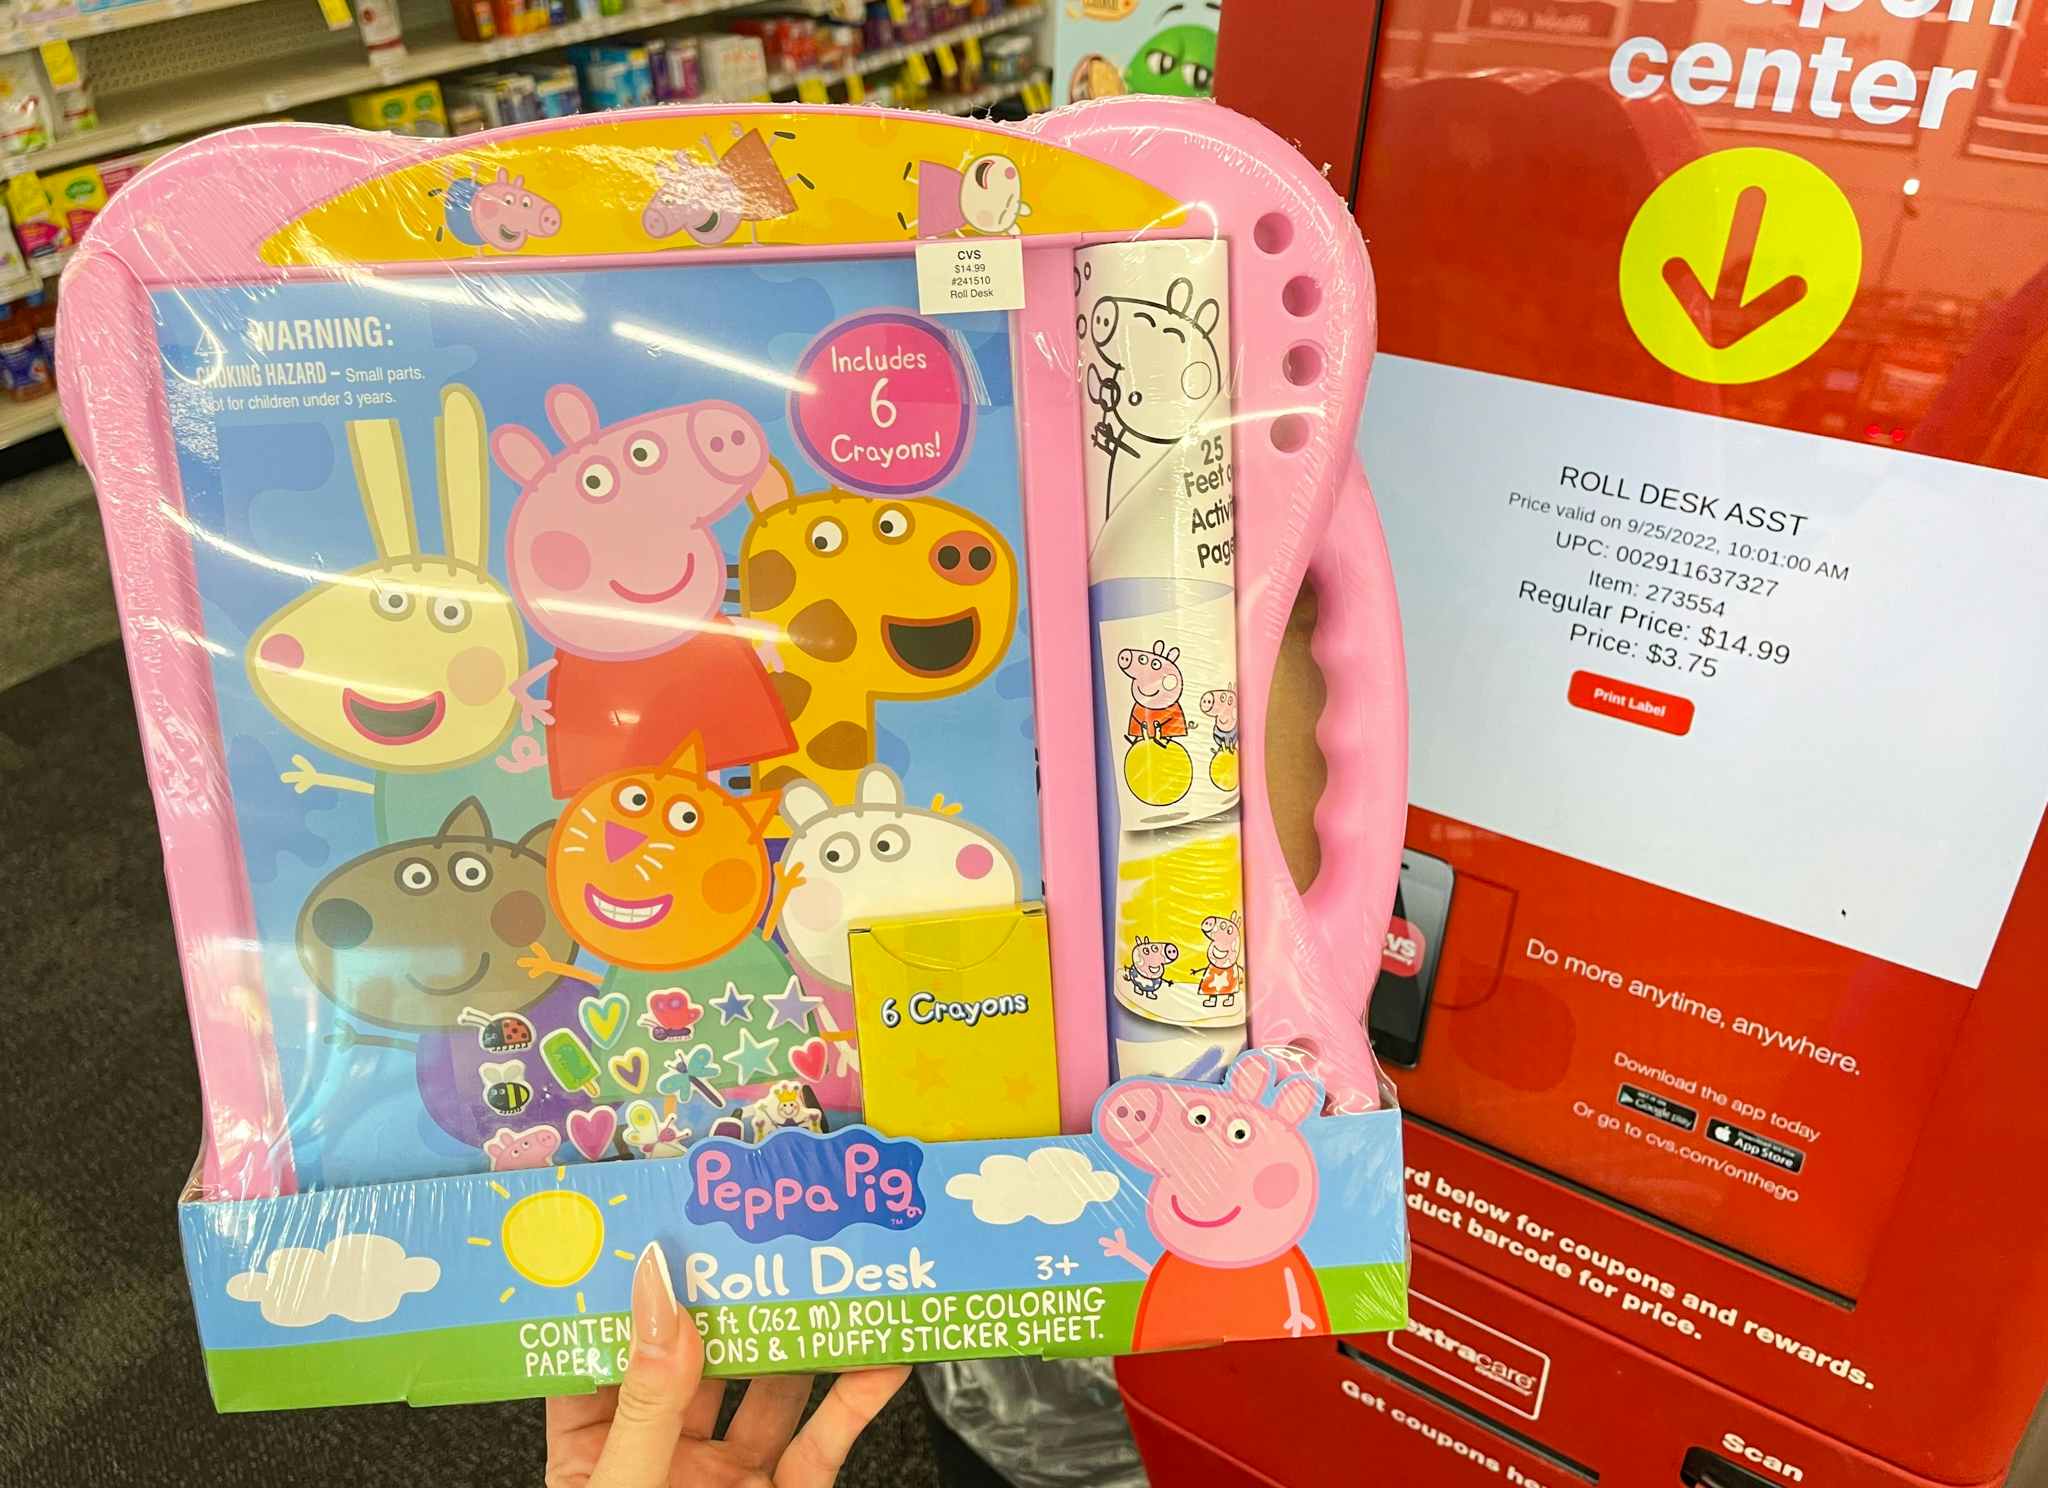 hand holding peppa pig toy next to coupon center